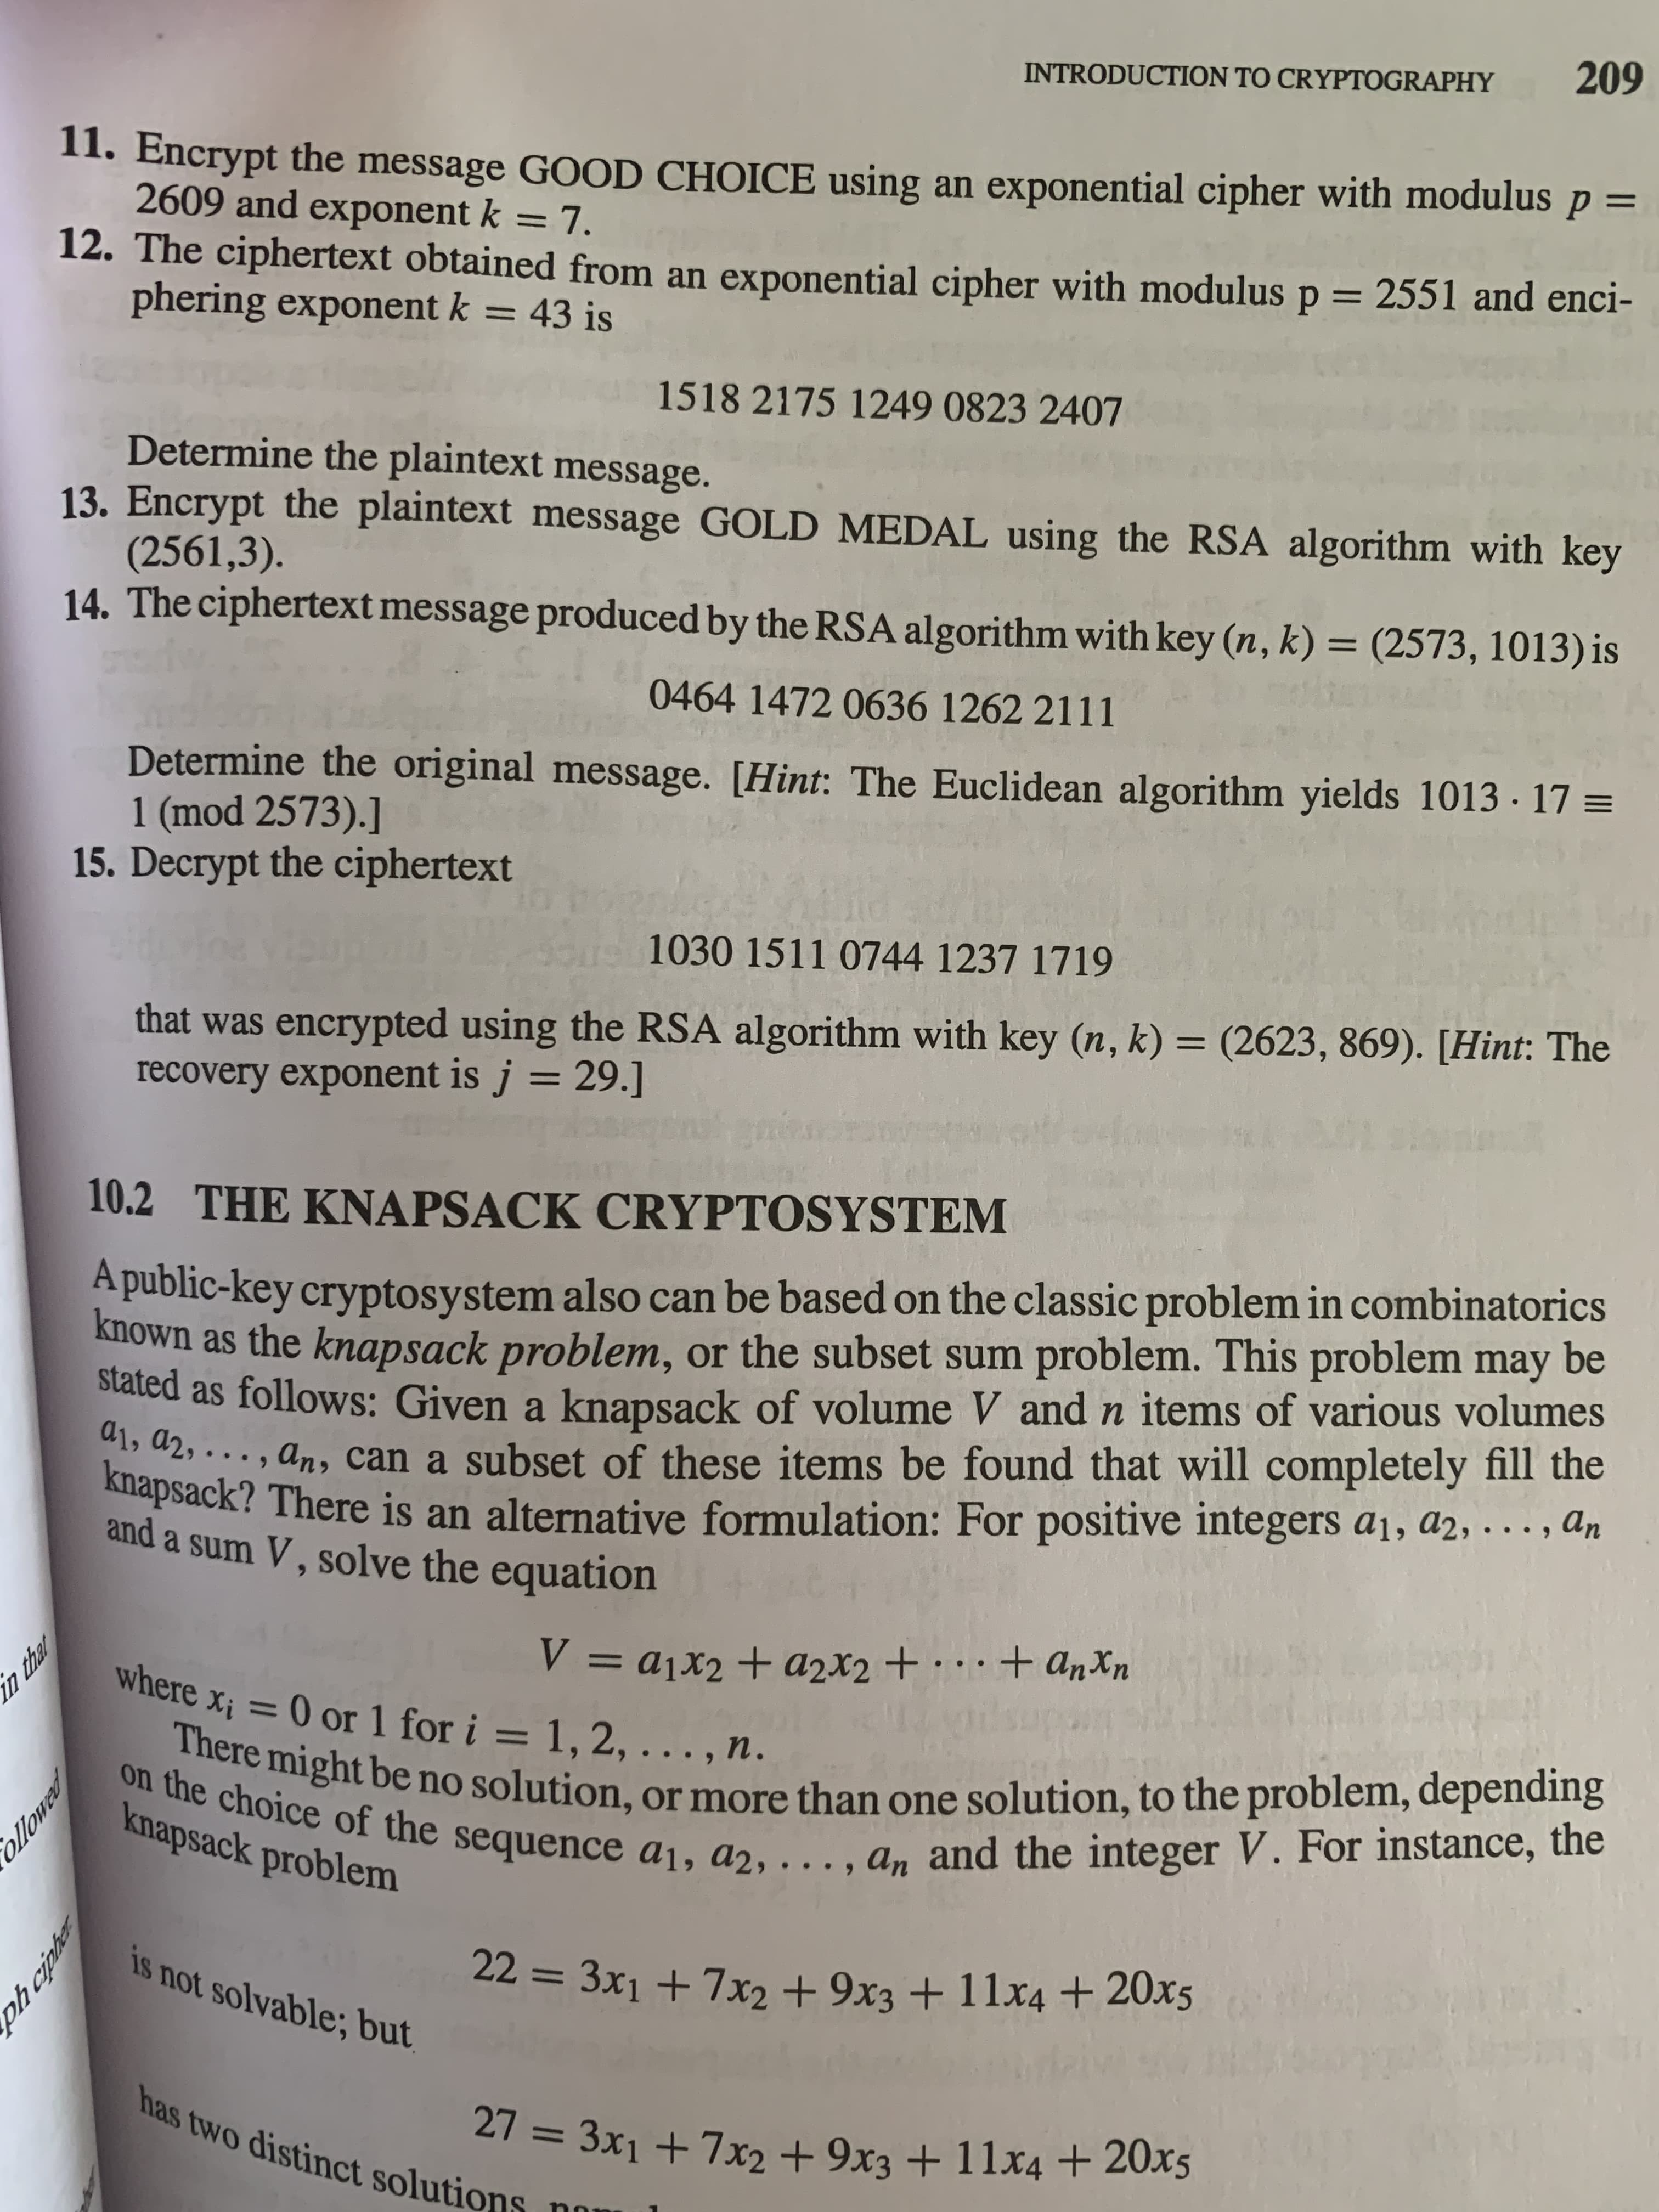 in that
ollowed
ph ciphe
INTRODUCTION TO CRYPTOGRAPHY
60
I1. Encrypt the message GOOD CHOICE using an exponential cipher with modulus ,
2609 and exponent k = 7.
12. The ciphertext obtained from an exponential cipher with modulus p = 2551 and enci-
phering exponent k = 43 is
= d
1518 2175 1249 0823 2407
Determine the plaintext message.
13. Encrypt the plaintext message GOLD MEDAL using the RSA algorithm with key
(2561,3).
14. The ciphertext message produced by the RSA algorithm with key (n, k) = (2573, 1013) is
046414720636 1262 2111
Determine the original message. [Hint: The Euclidean algorithm yields 1013 · 17 =
1 (mod 2573).]
15. Decrypt the ciphertext
1030 1511 0744 1237 1719
that was encrypted using the RSA algorithm with key (n, k) = (2623, 869). [Hint: The
recovery exponent is j = 29.]
%3D
10.2 THE KNAPSACK CRYPTOSYSTEM
A public-key cryptosystem also can be based on the classic problem in combinatorics
known as the knapsack problem, or the subset sum problem. This problem may be
stated as follows: Given a knapsack of volume V and n items of various volumes
42, ..., an, can a subset of these items be found that will completely fill the
knapsack? There is an alternative formulation: For positive integers a1, a2, . .., An
and a sum V , solve the equation
Uxup +...+ + D = /
Where xị = 0 or 1 for i = 1, 2, . . . , n.
the onght be no solution, or more than one solution, to the problem, dependng
knapsack problem
is not solvable; but
3D%3=
has two distinct solutions
